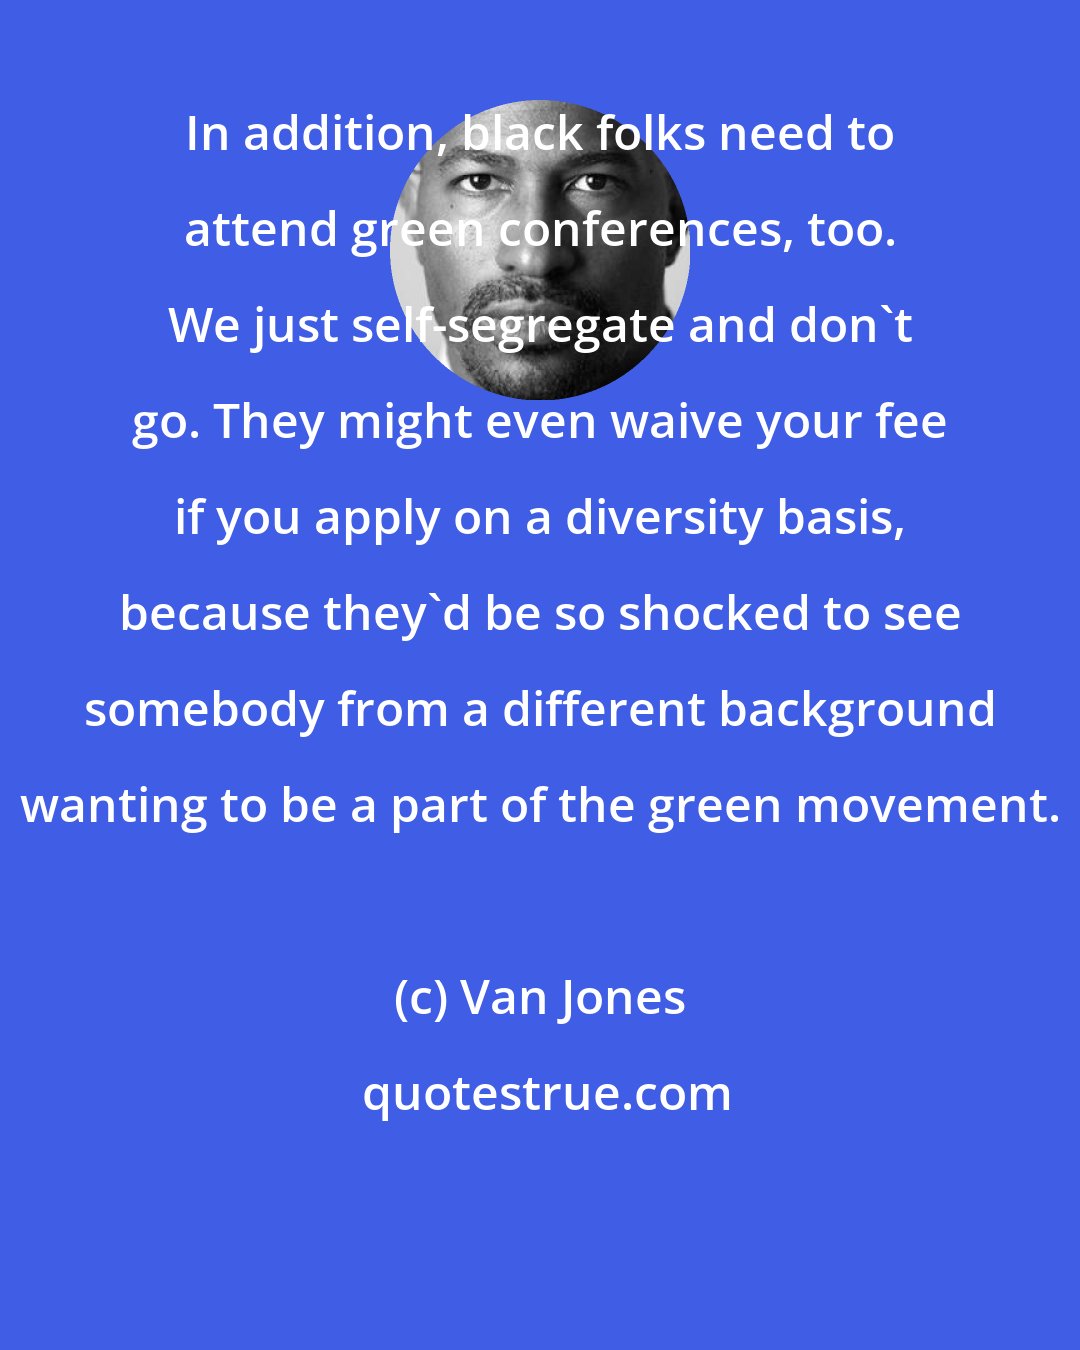 Van Jones: In addition, black folks need to attend green conferences, too. We just self-segregate and don't go. They might even waive your fee if you apply on a diversity basis, because they'd be so shocked to see somebody from a different background wanting to be a part of the green movement.